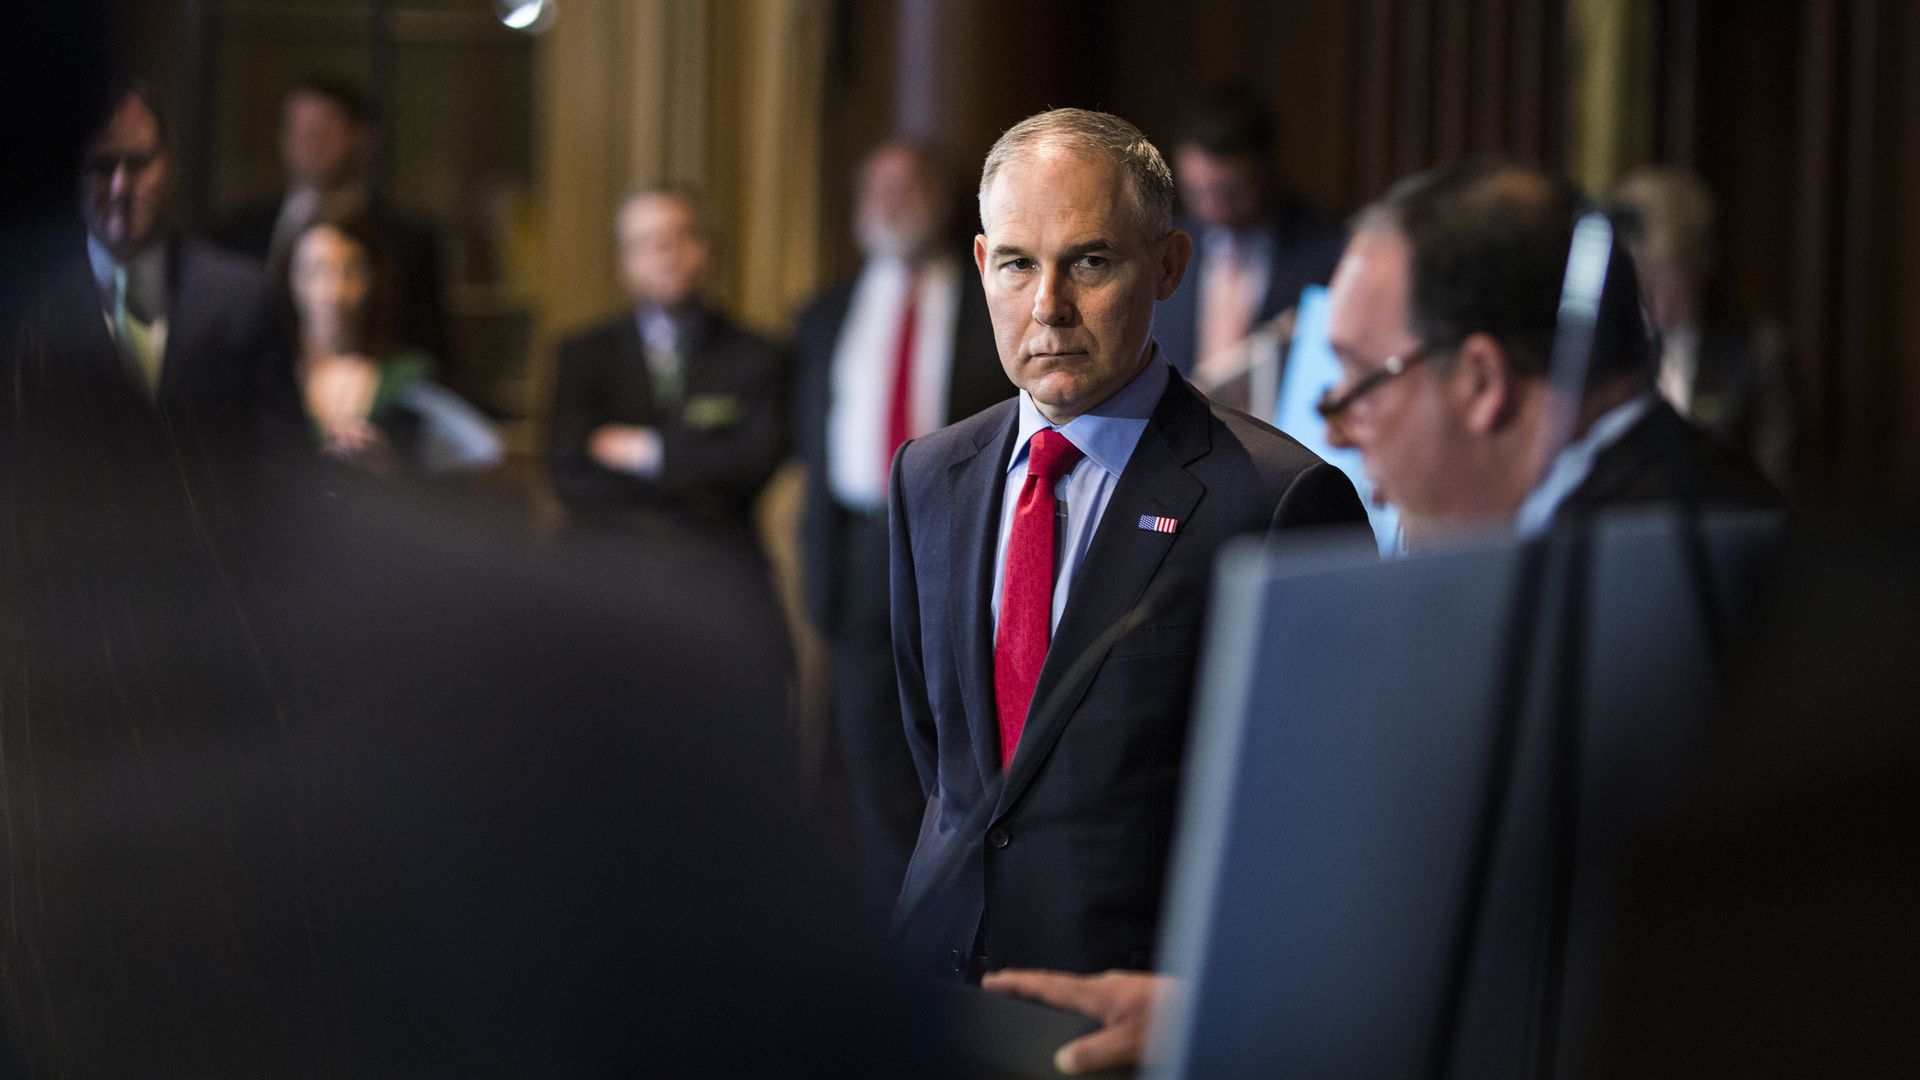 Scott Pruitt looks out the side of his eyes at a presentation.